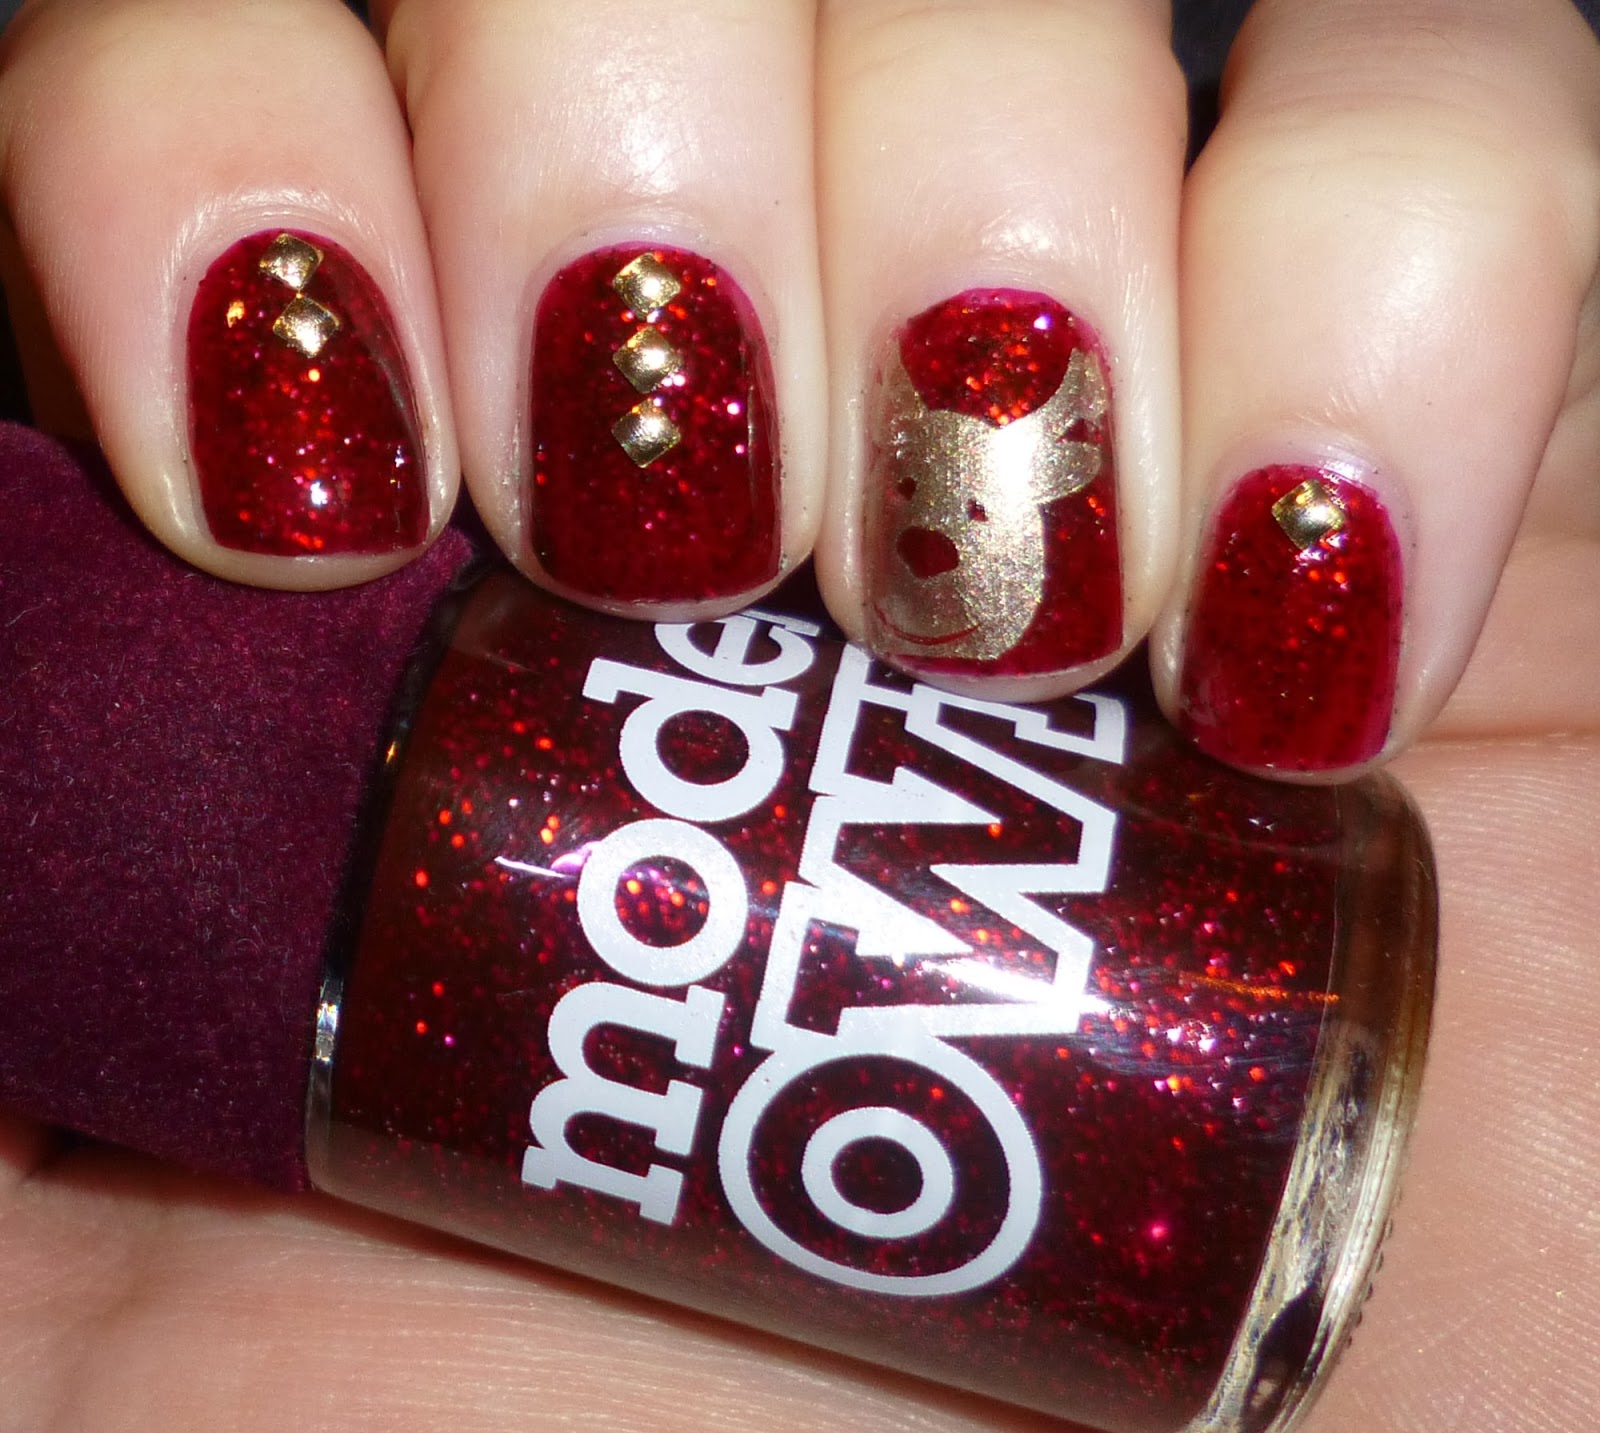 Lou is Perfectly Polished: Christmas Nails: Rudolph